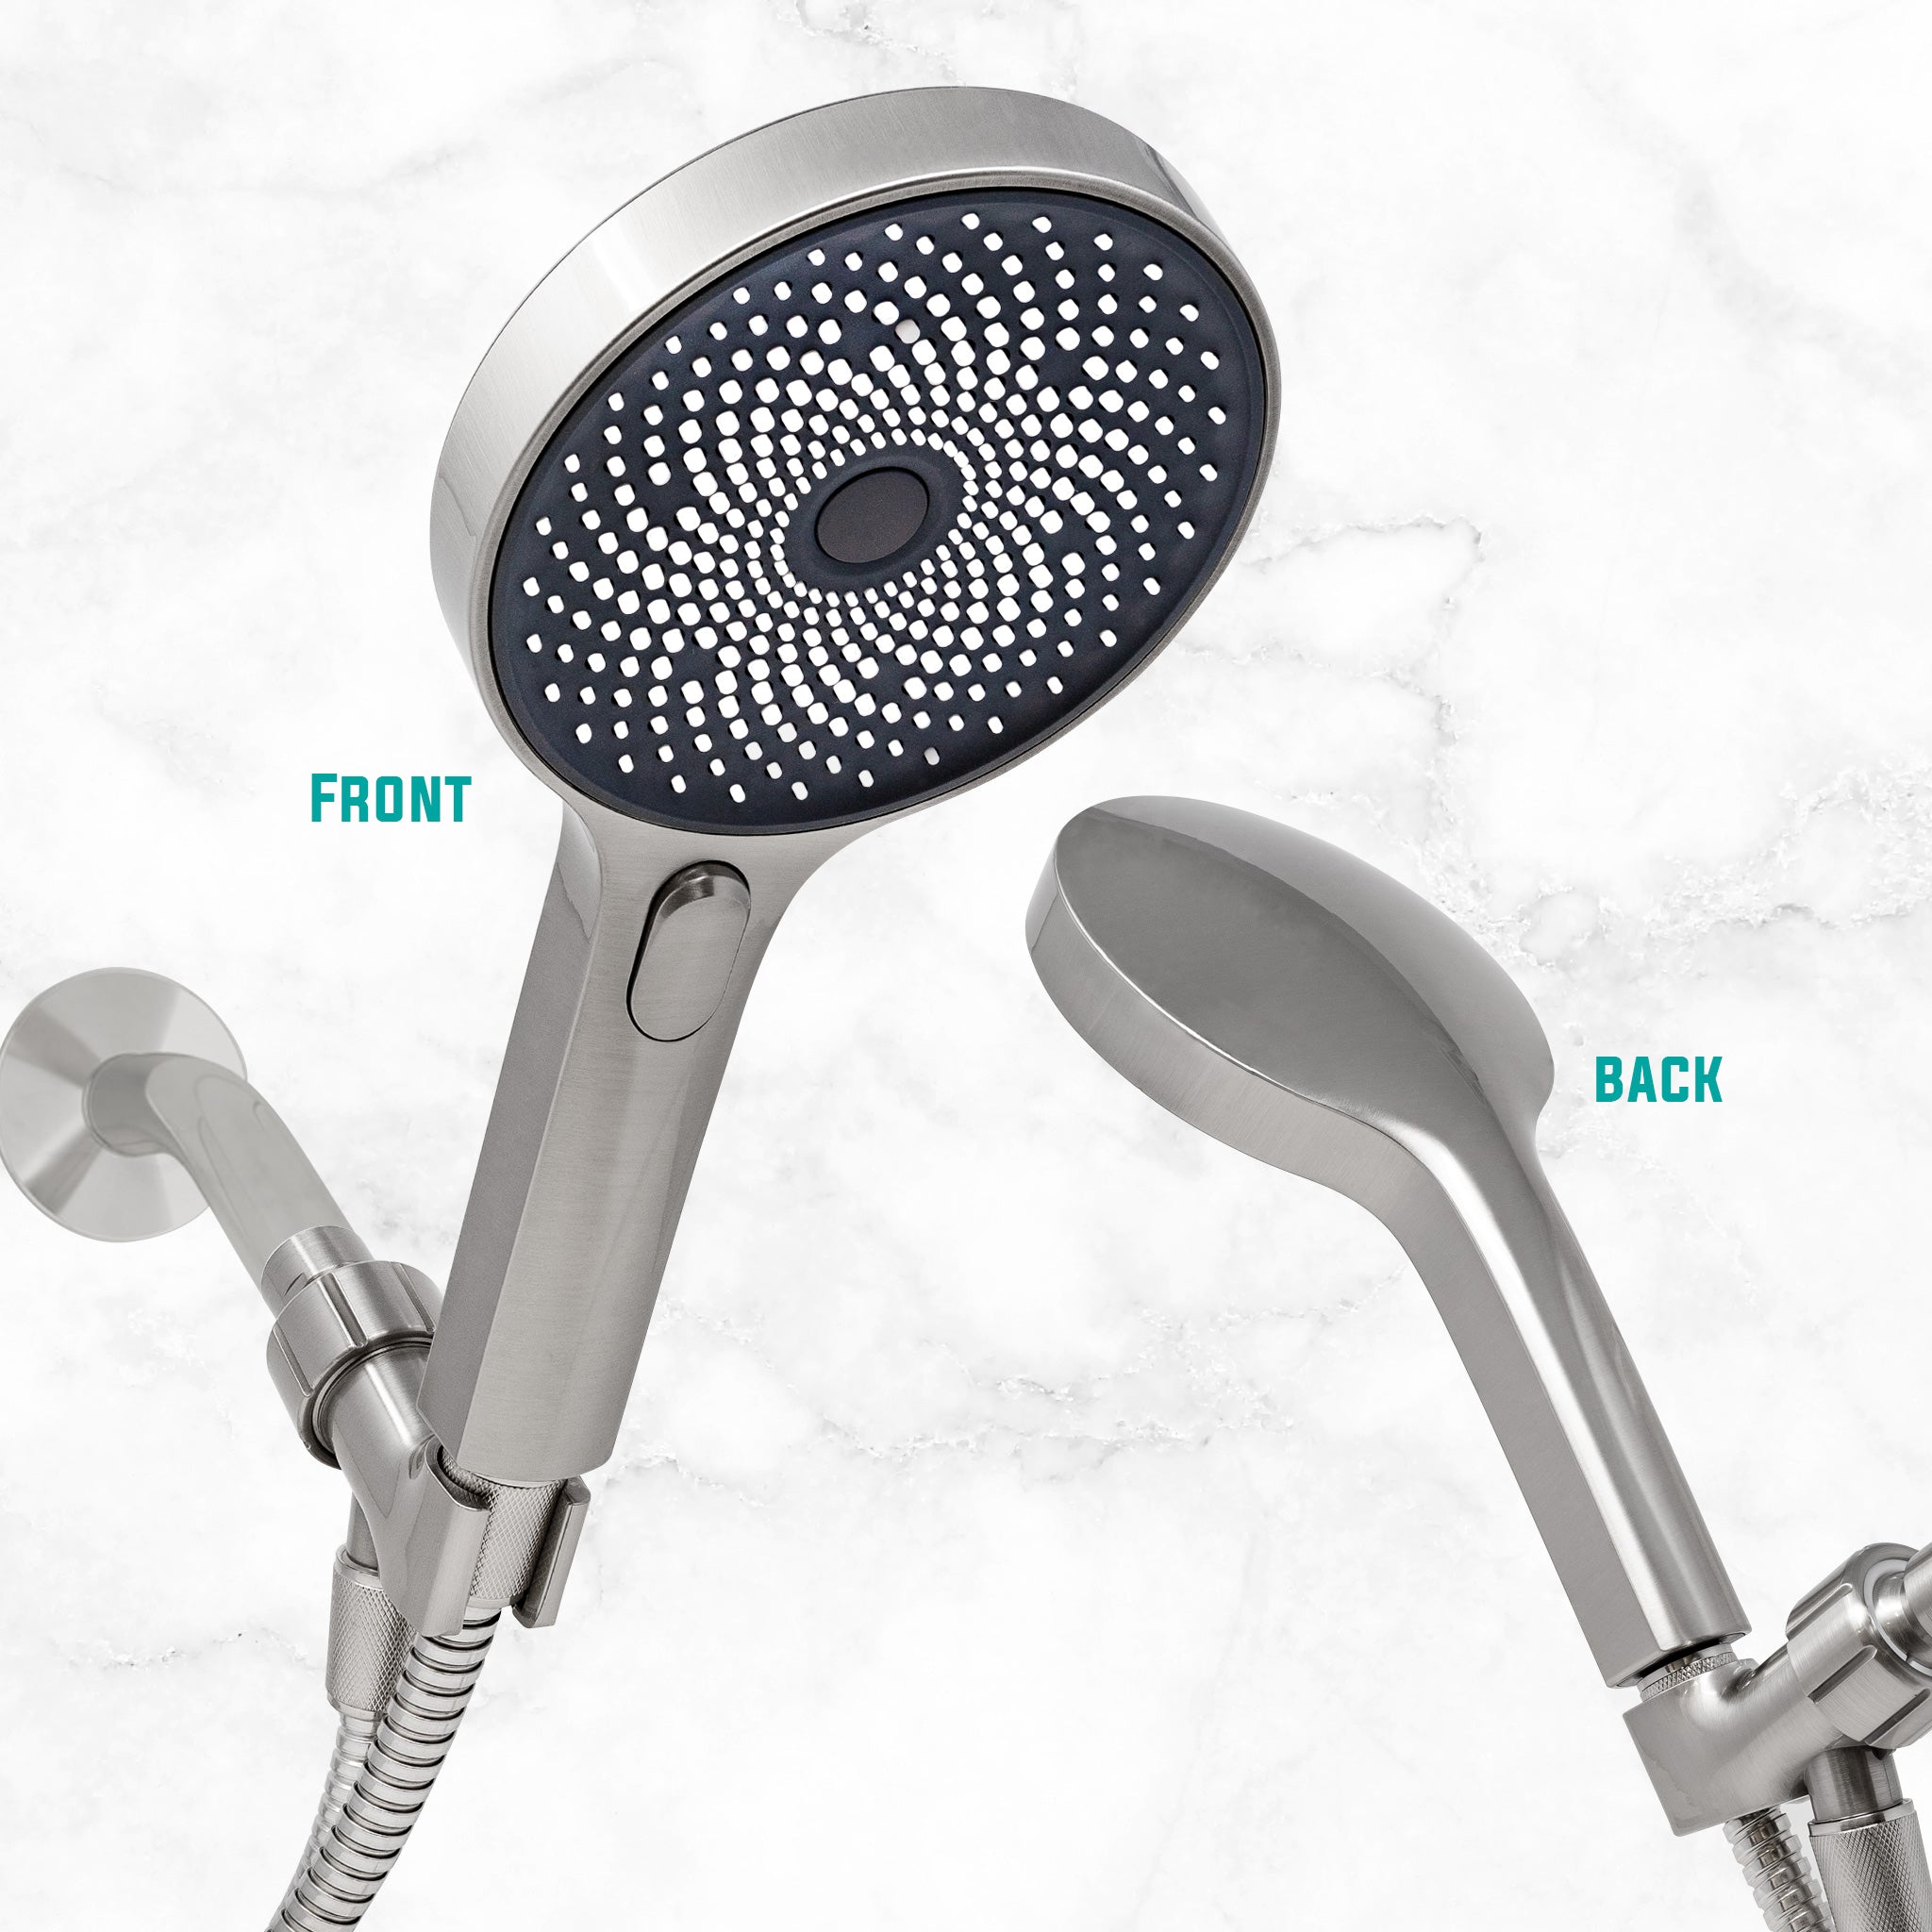 Metpure High-Pressure Handheld Shower Head with Easy Clicker - Multiple Spray Patterns. 5" Large Head for Waterfall Showering Experience. Stainless Steel Hose & Adjustable Mount Holder. Brushed Nickel